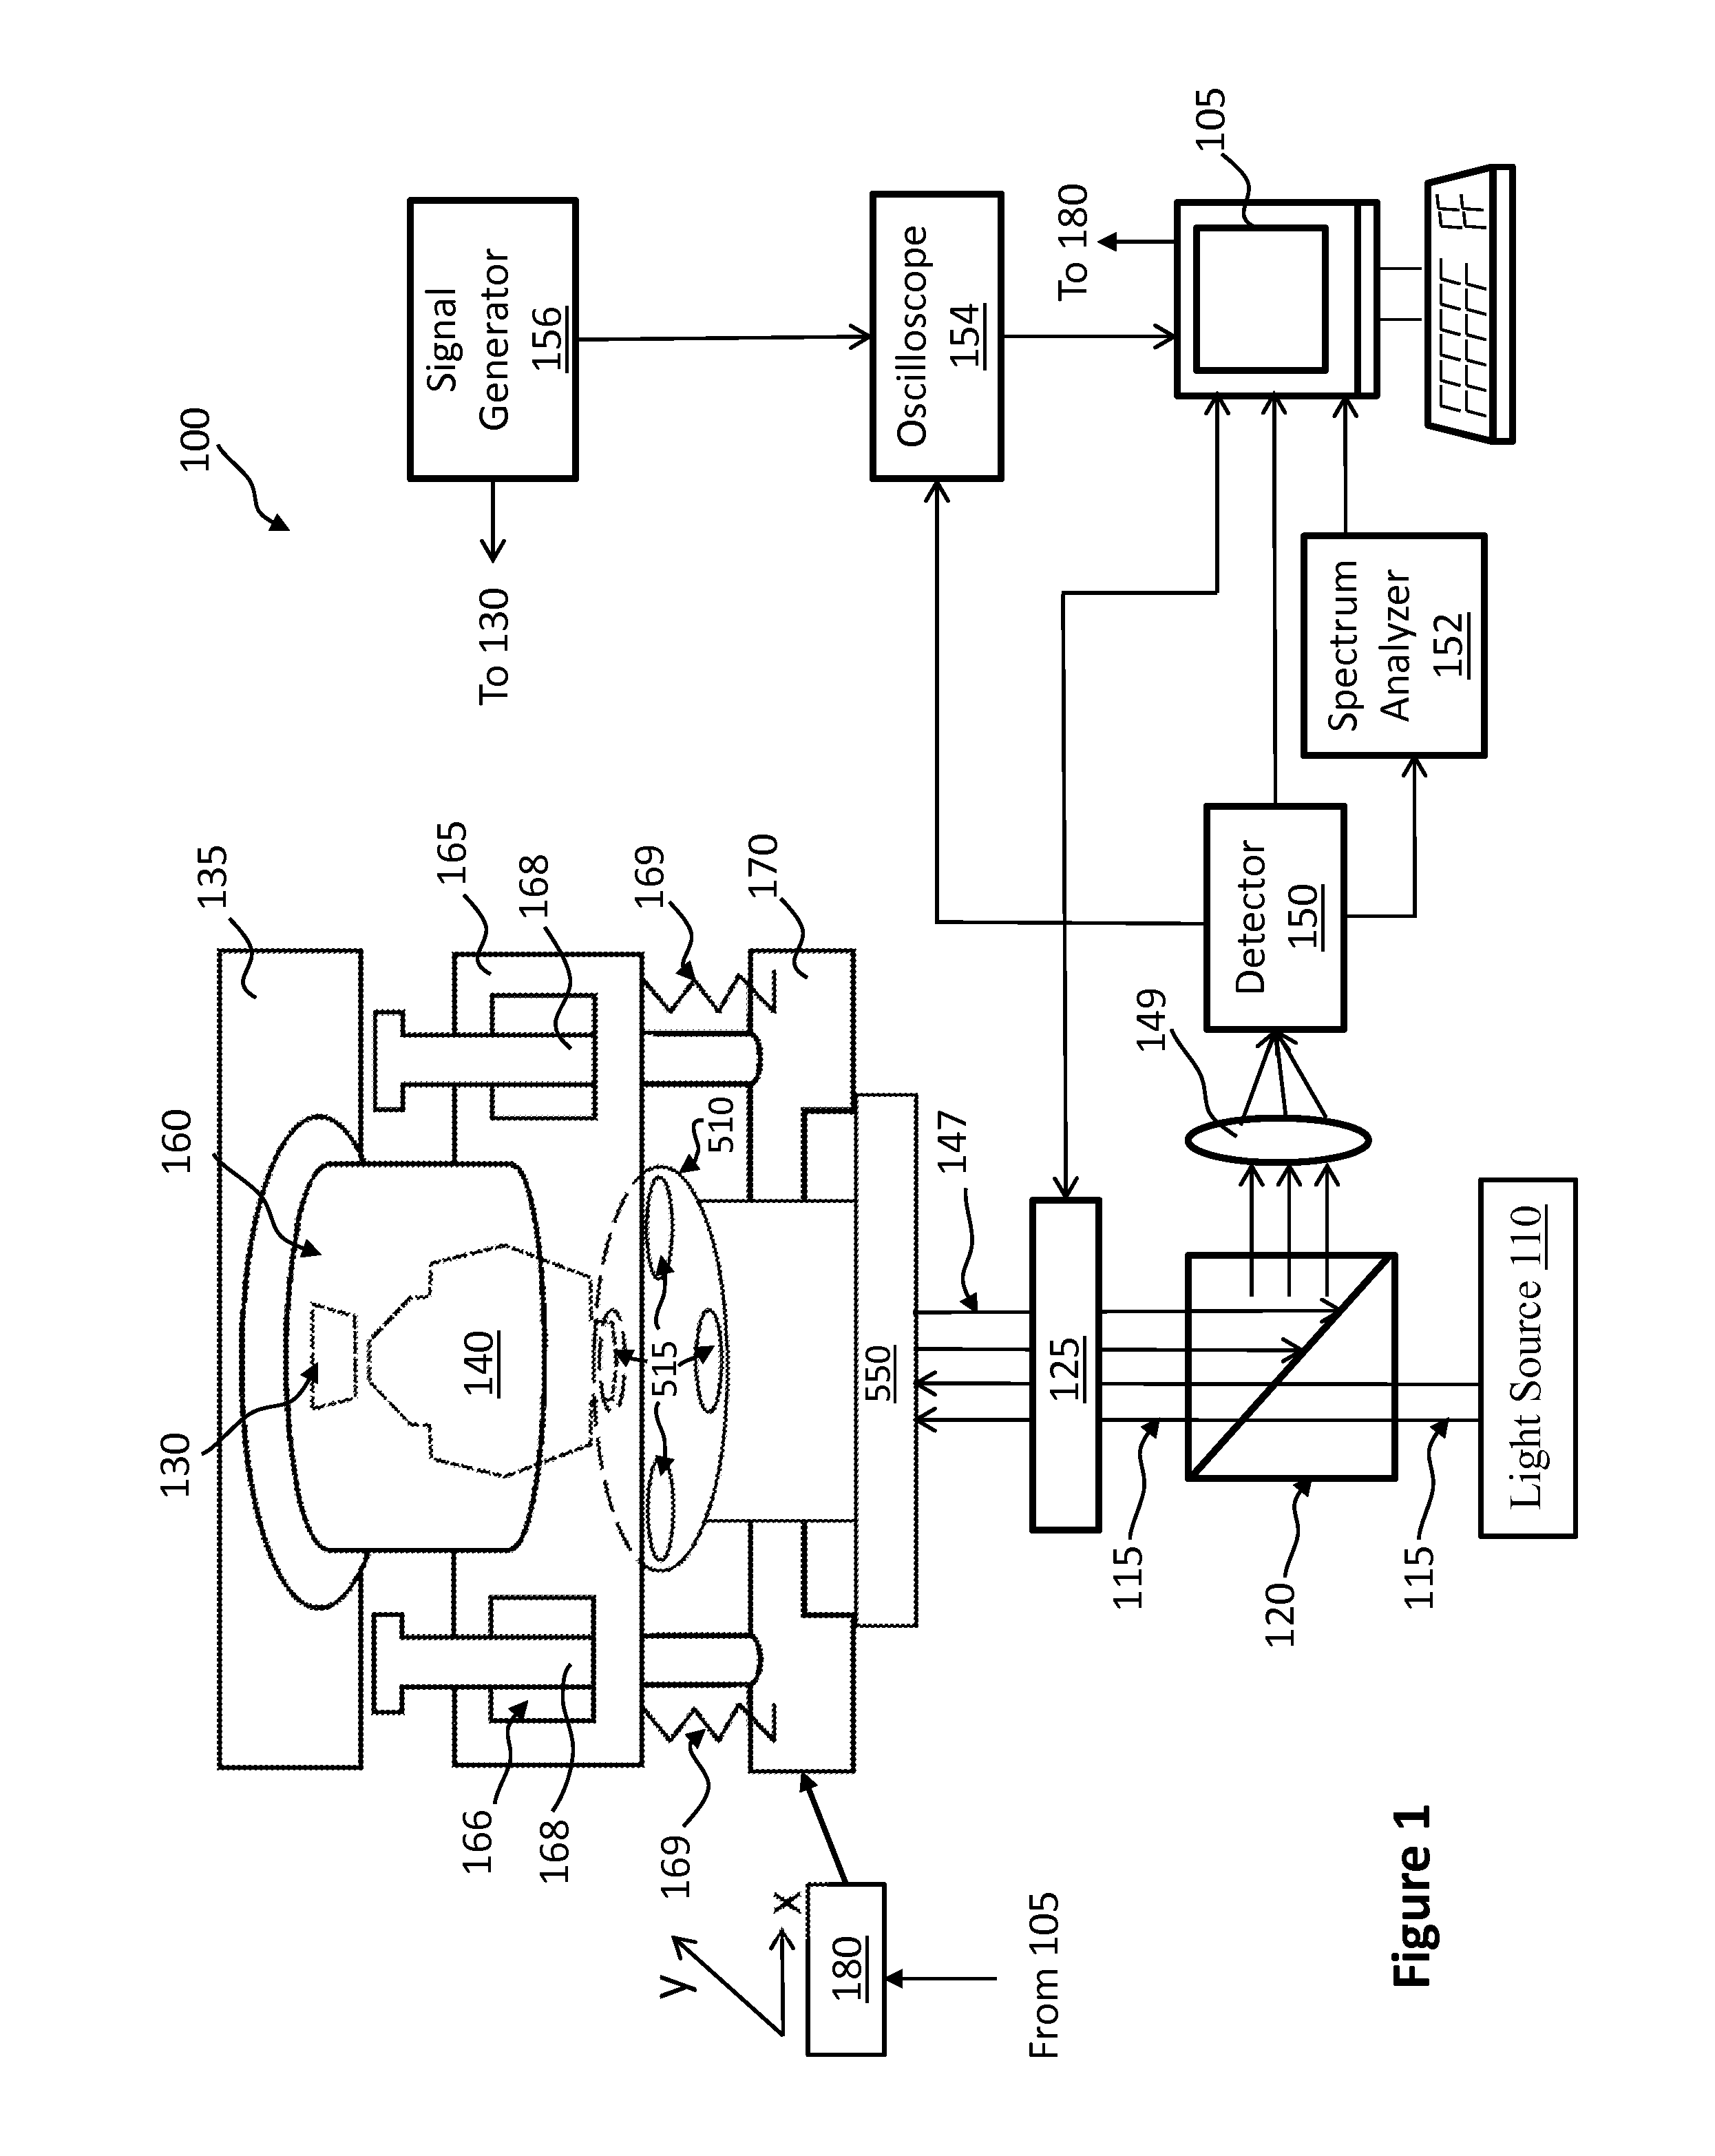 Optical probe system having accurate positional and orientational adjustments for multiple optical objectives